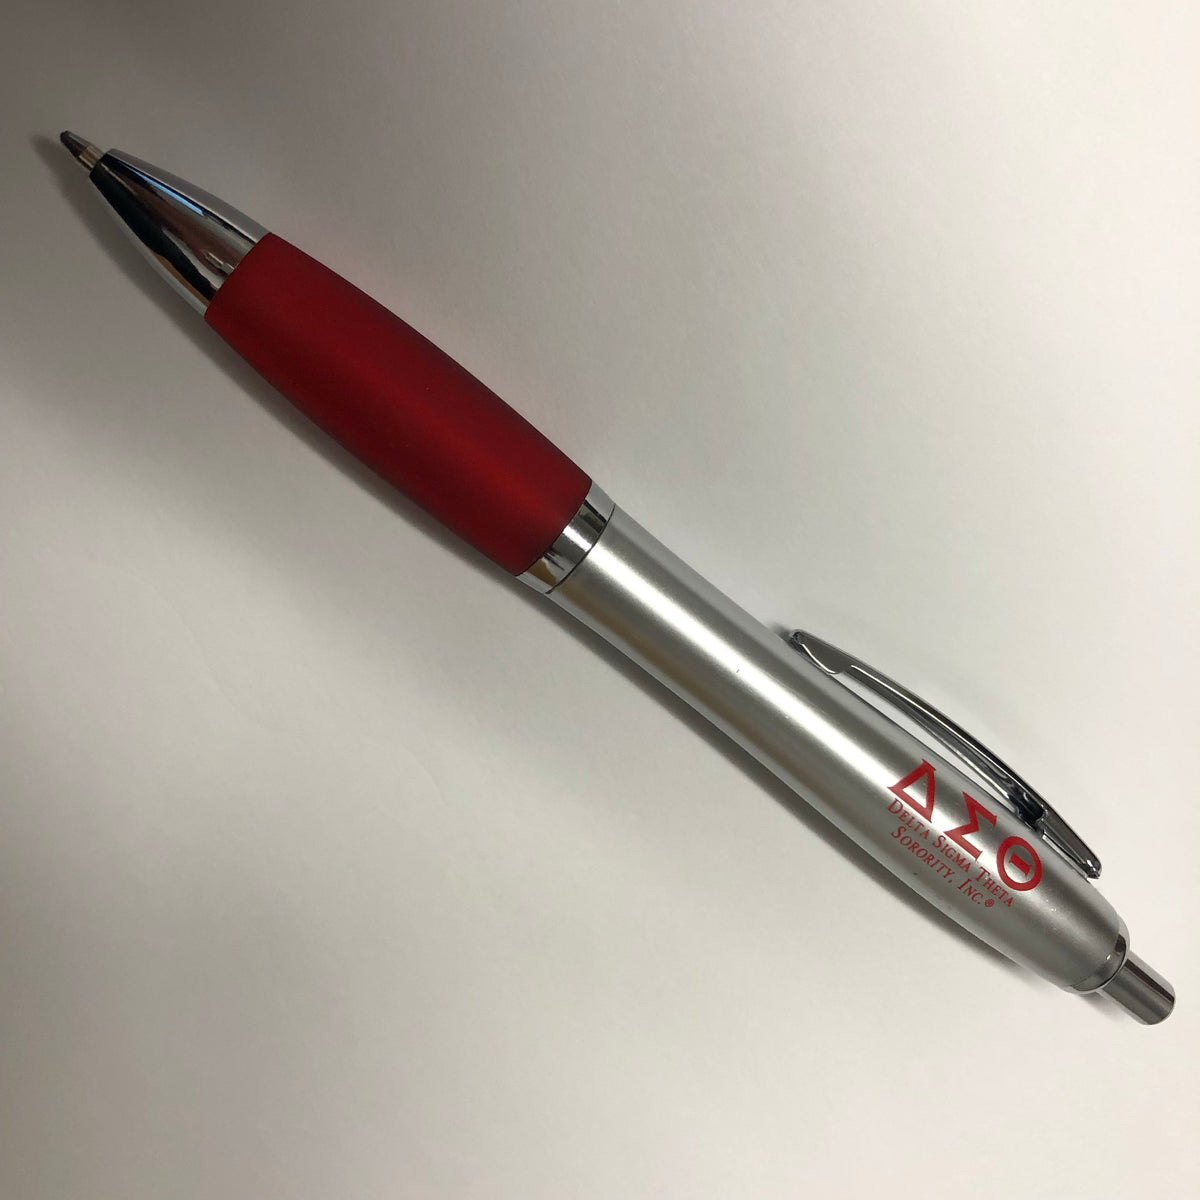 Delta Sigma Theta Red and White Ink Pen